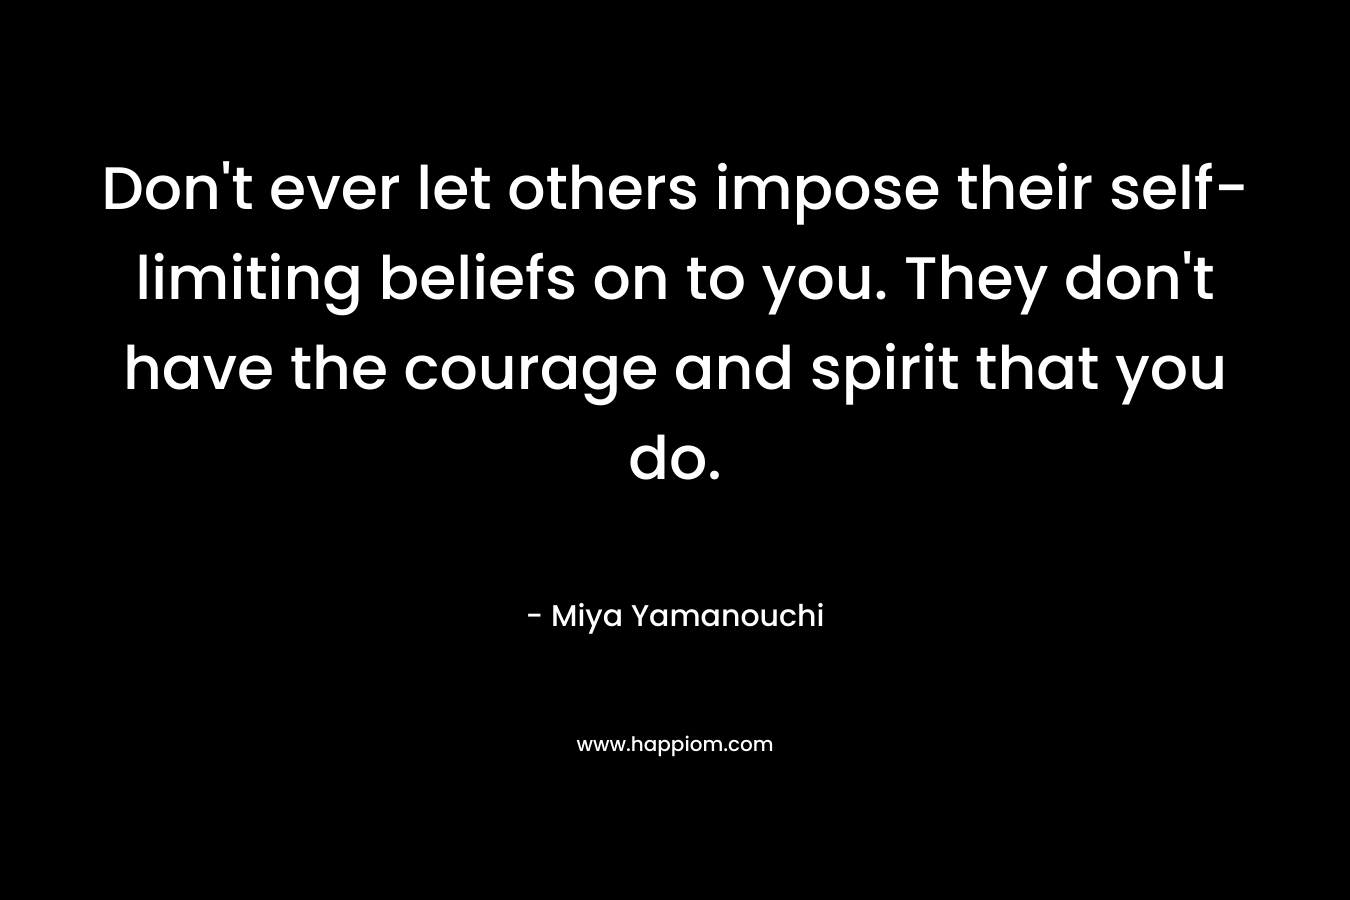 Don't ever let others impose their self-limiting beliefs on to you. They don't have the courage and spirit that you do.